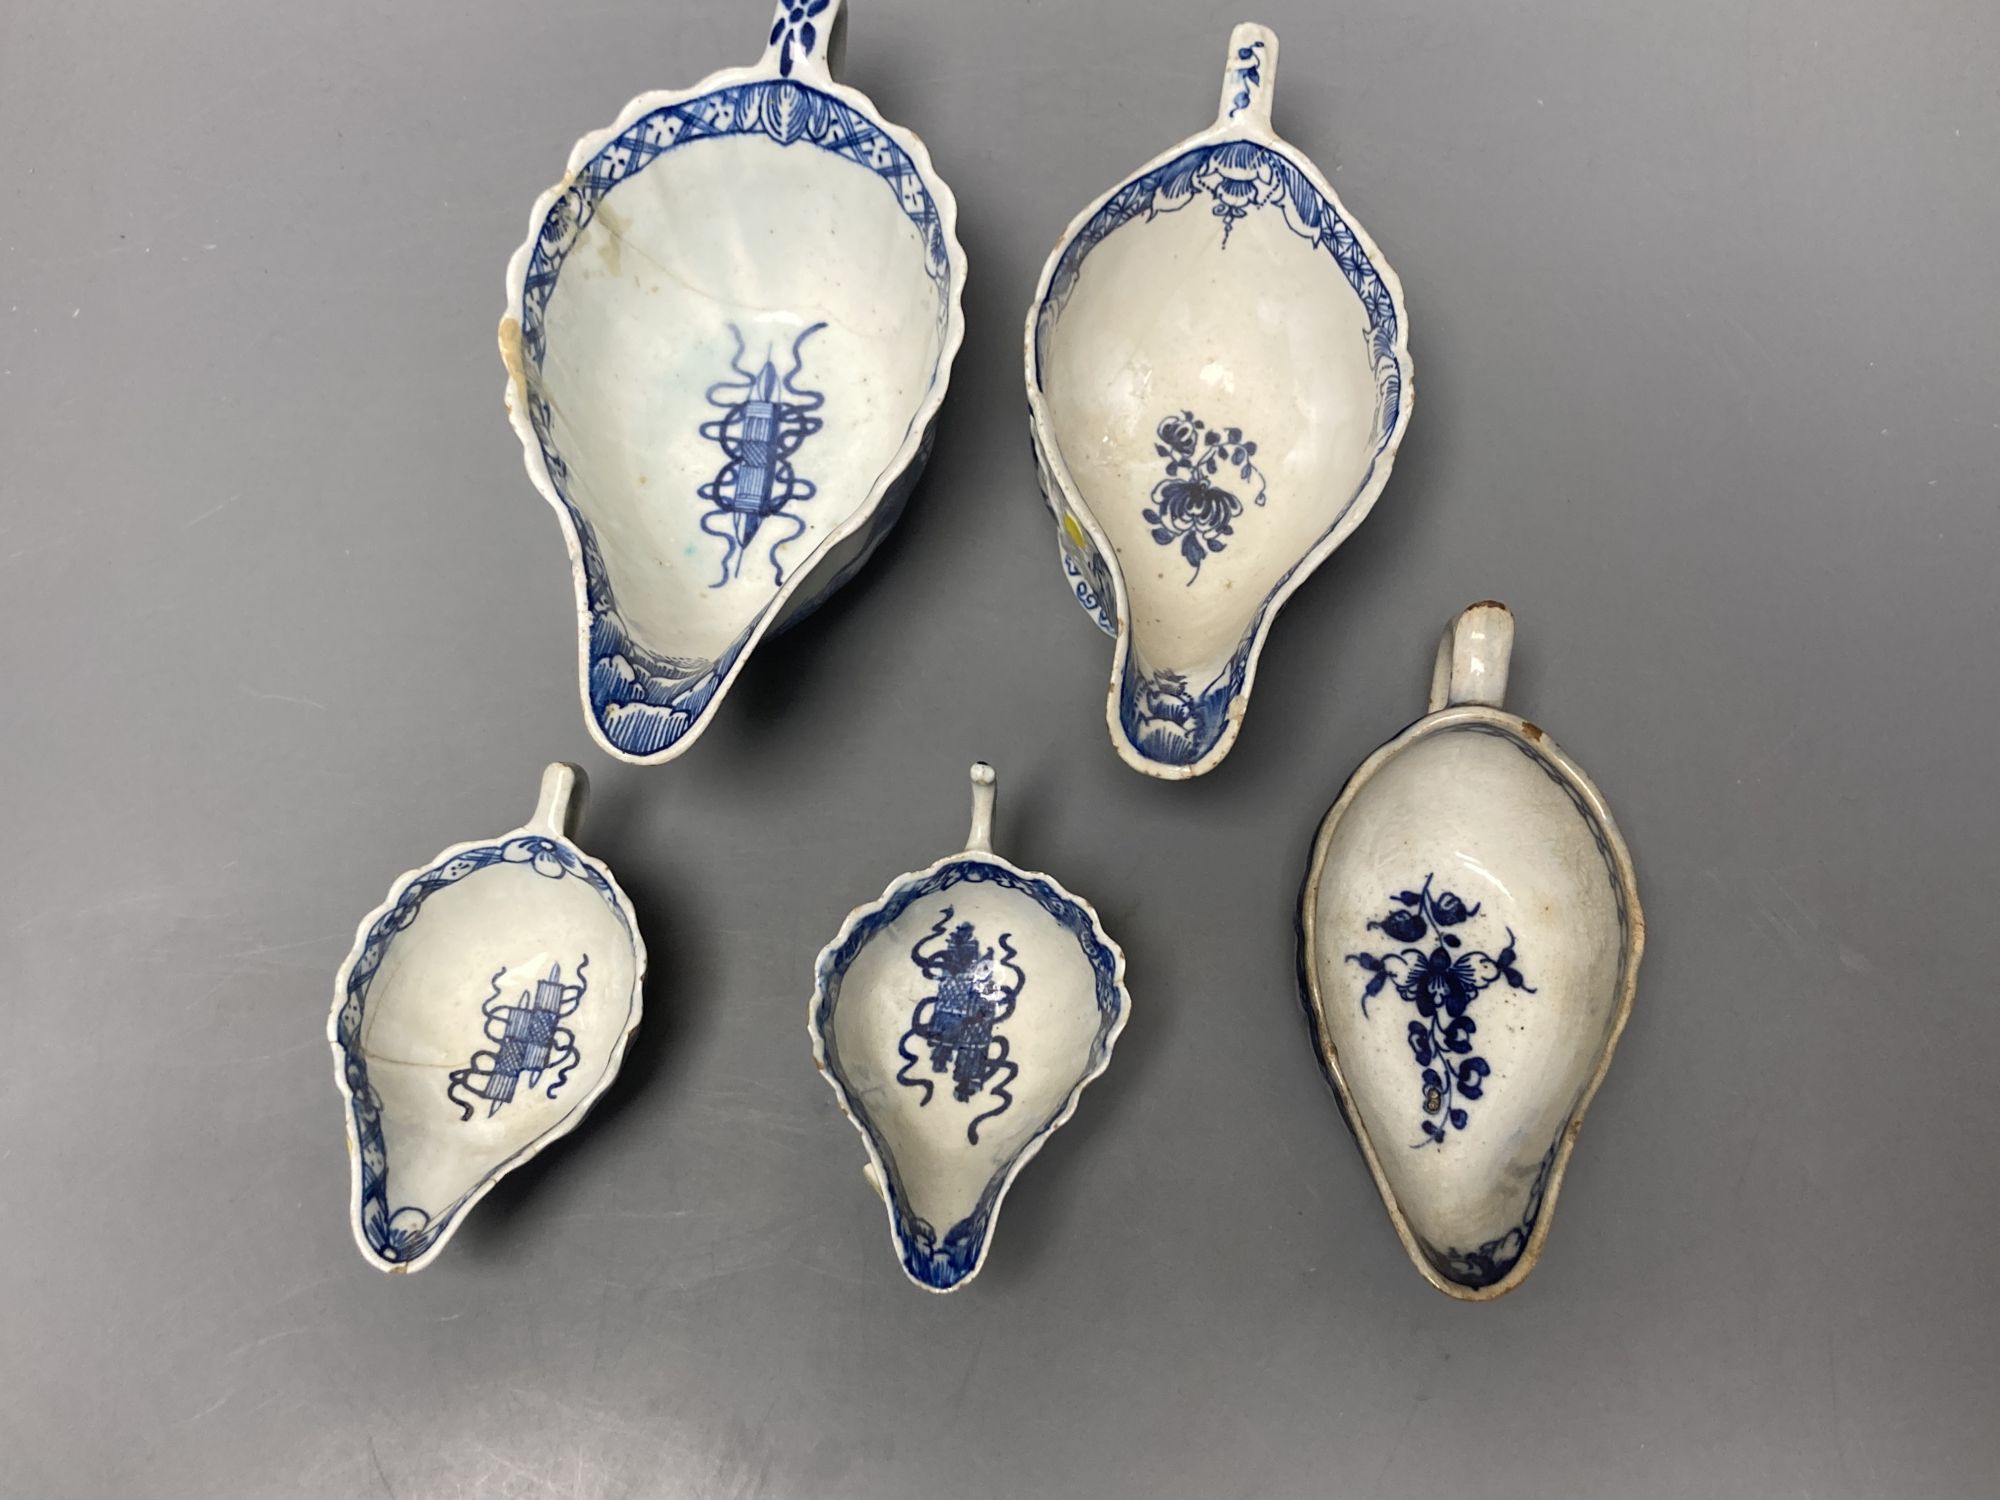 Five Bow blue and white sauceboats, circa 1770.